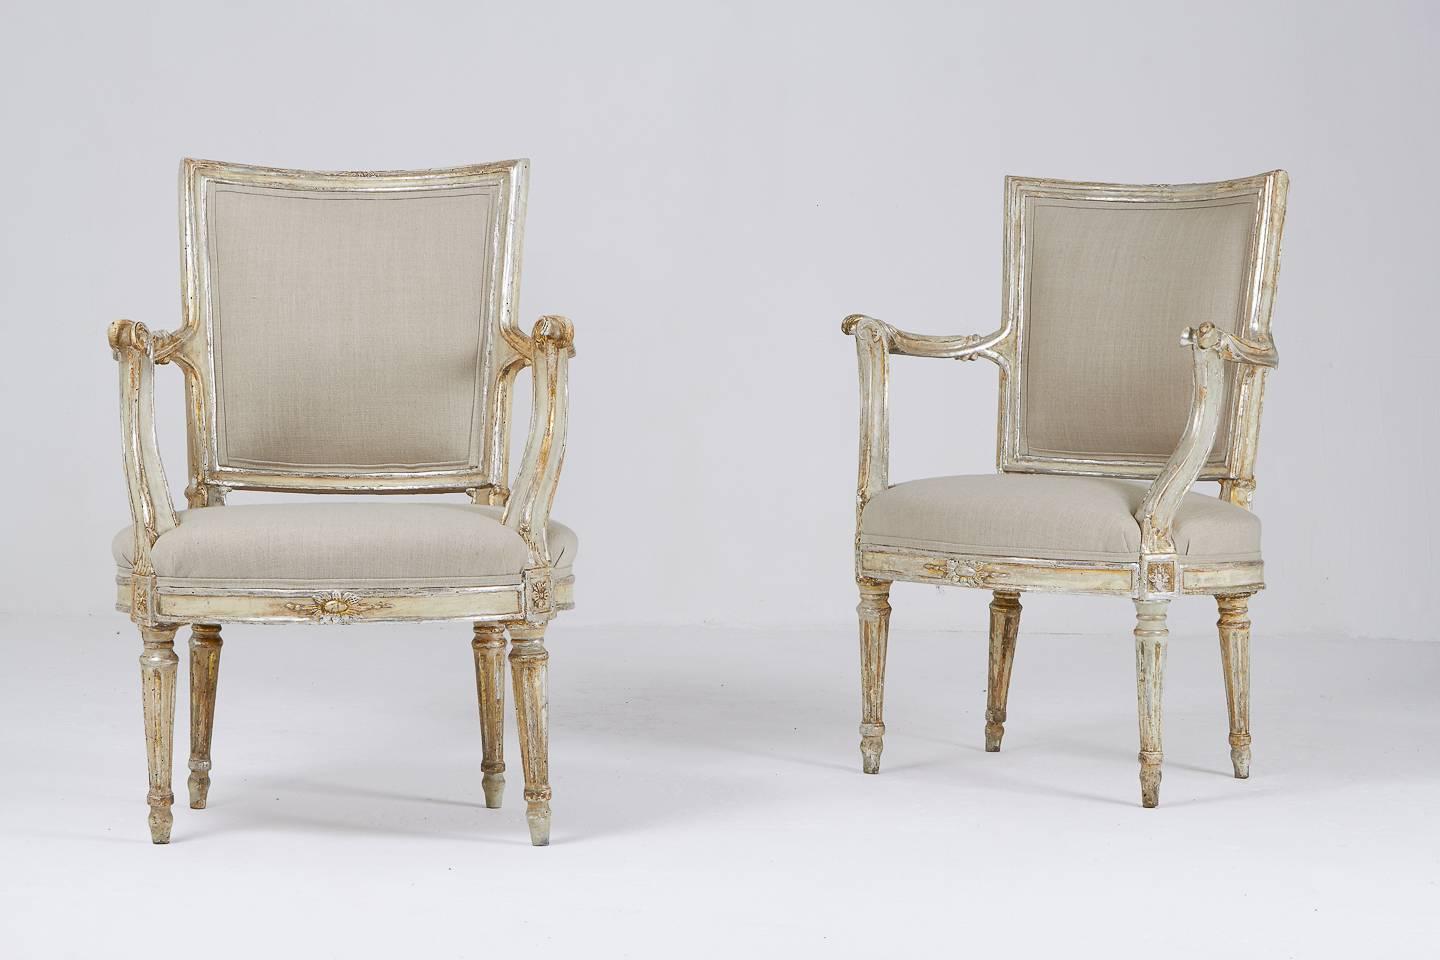 Pair of 18th Century Silver Gilt Chairs 3